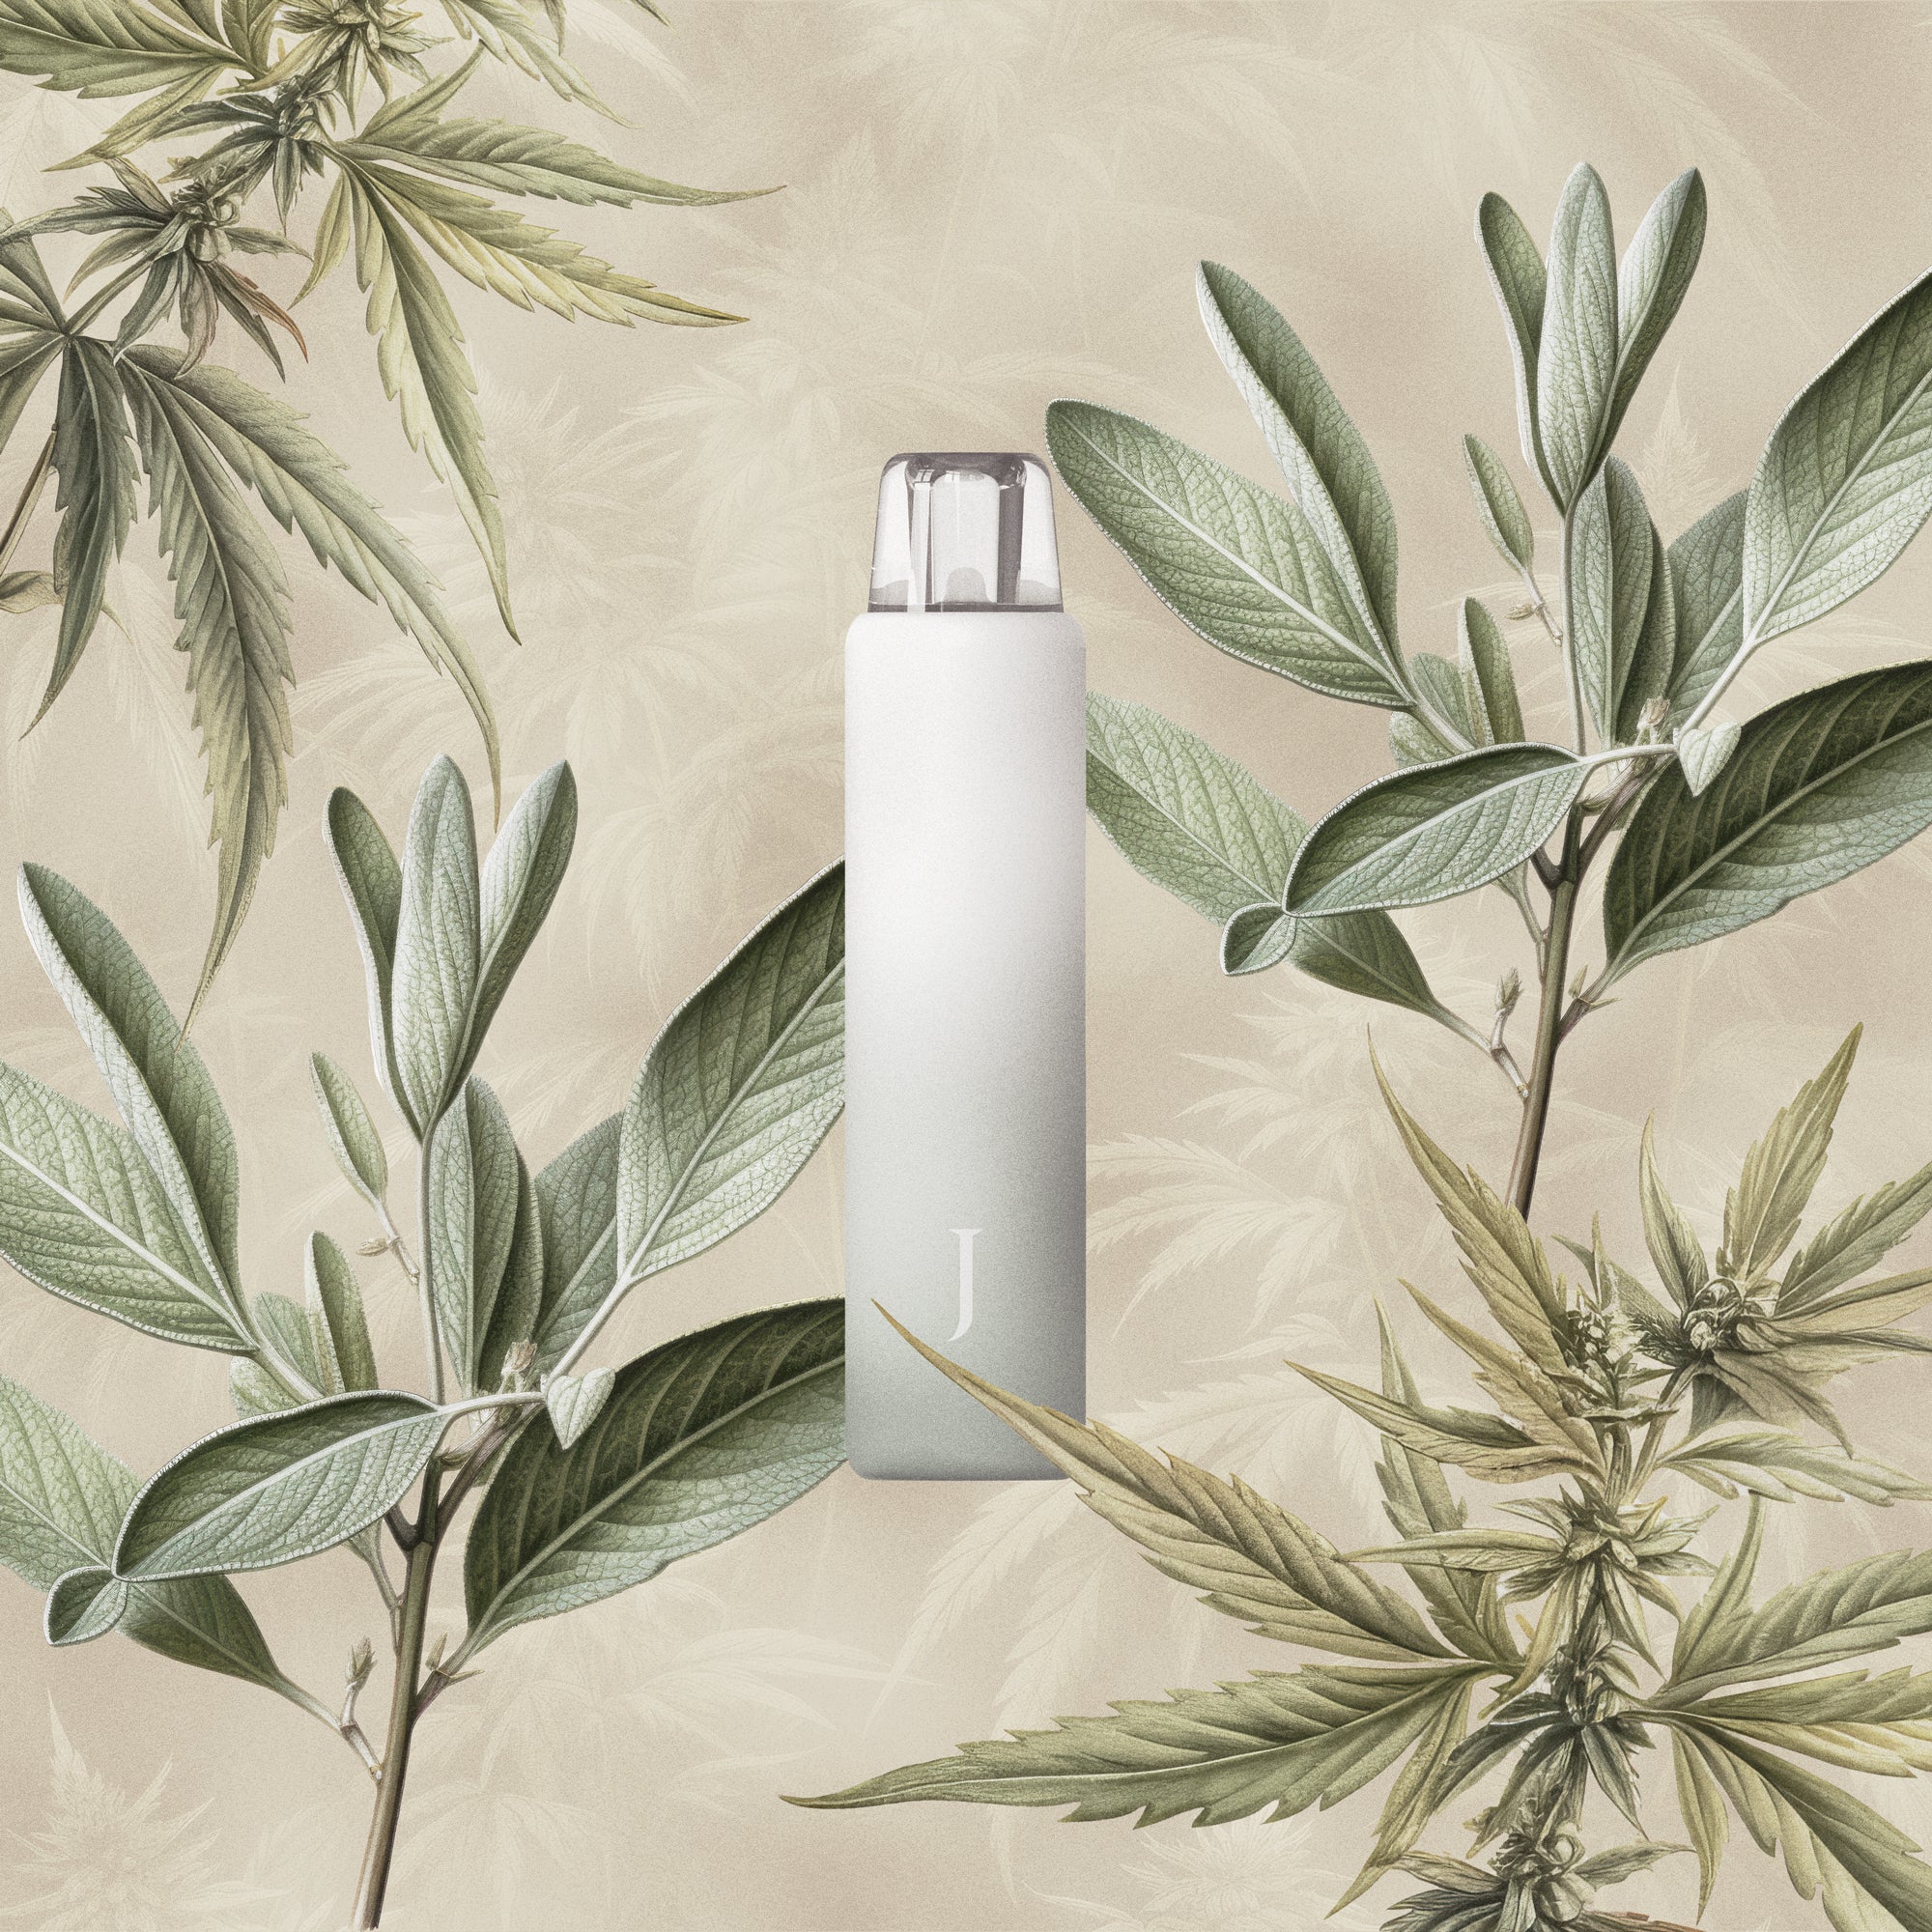 Juana All-in-One Cannabis Vape Pen with Marijuana Leaves and Sage Botanical Illustrations